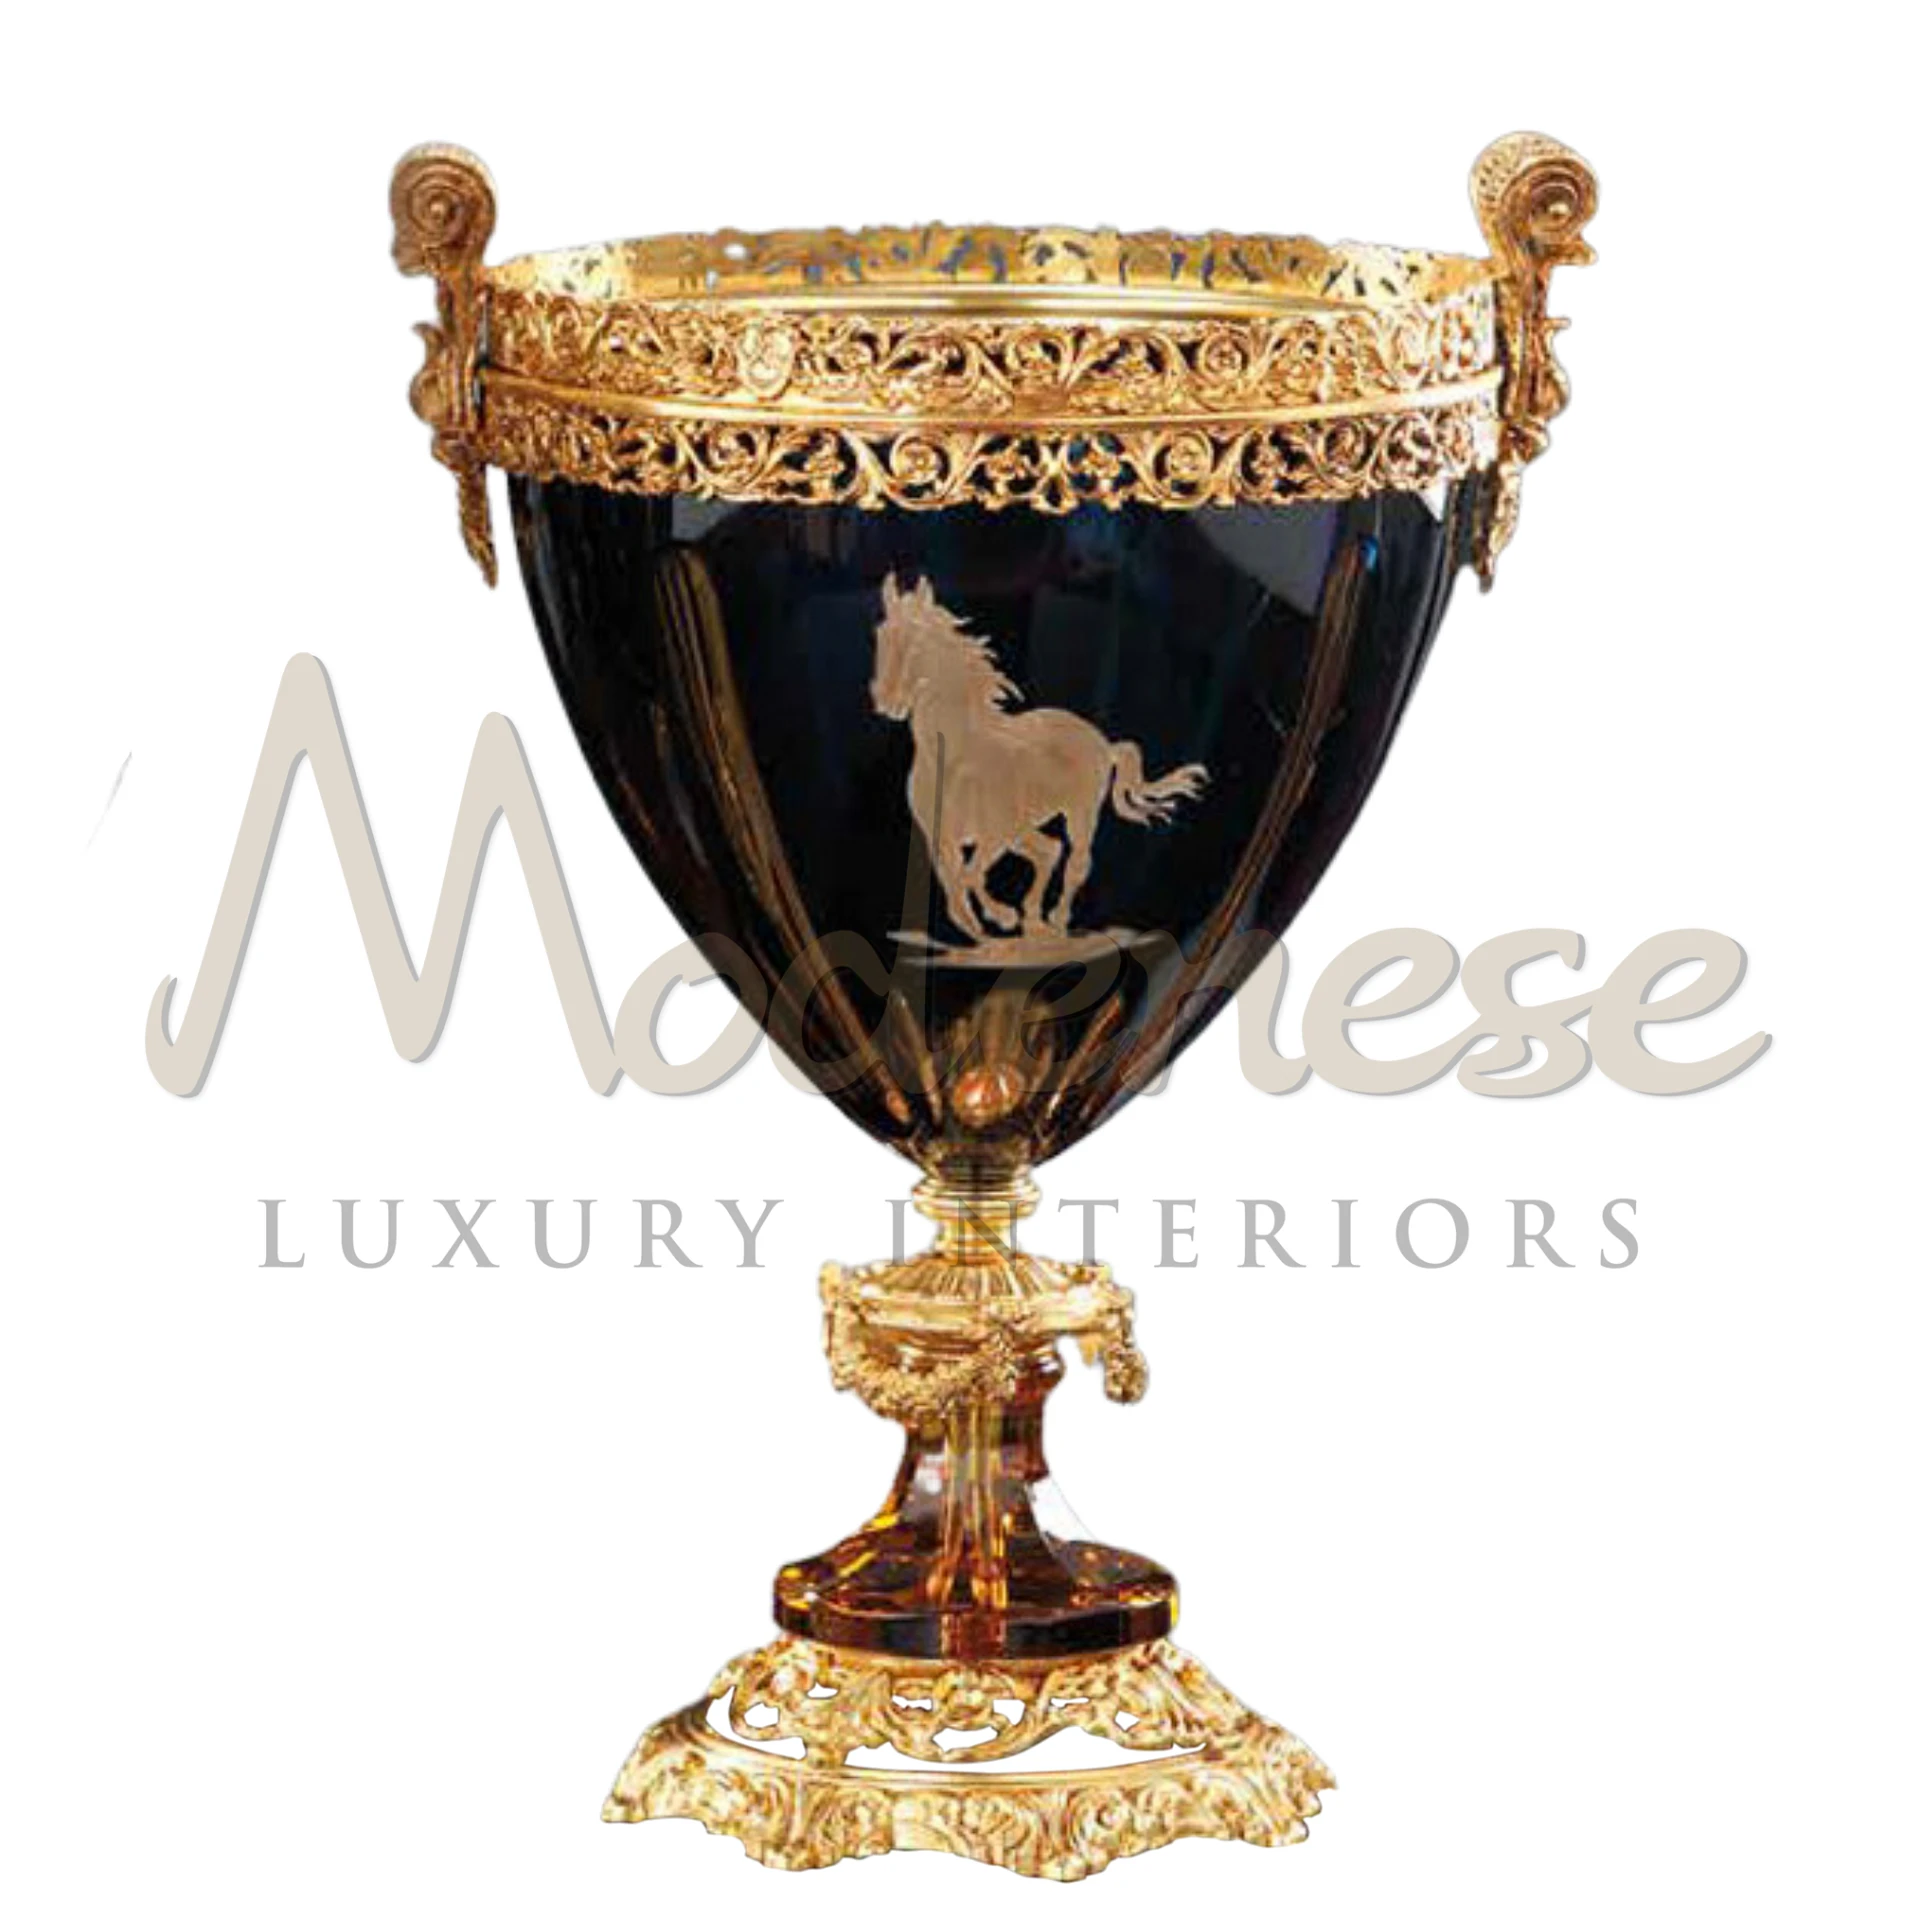 Intricately designed Victorian luxury glass vase, ideal for adding classic elegance to any luxury interior.